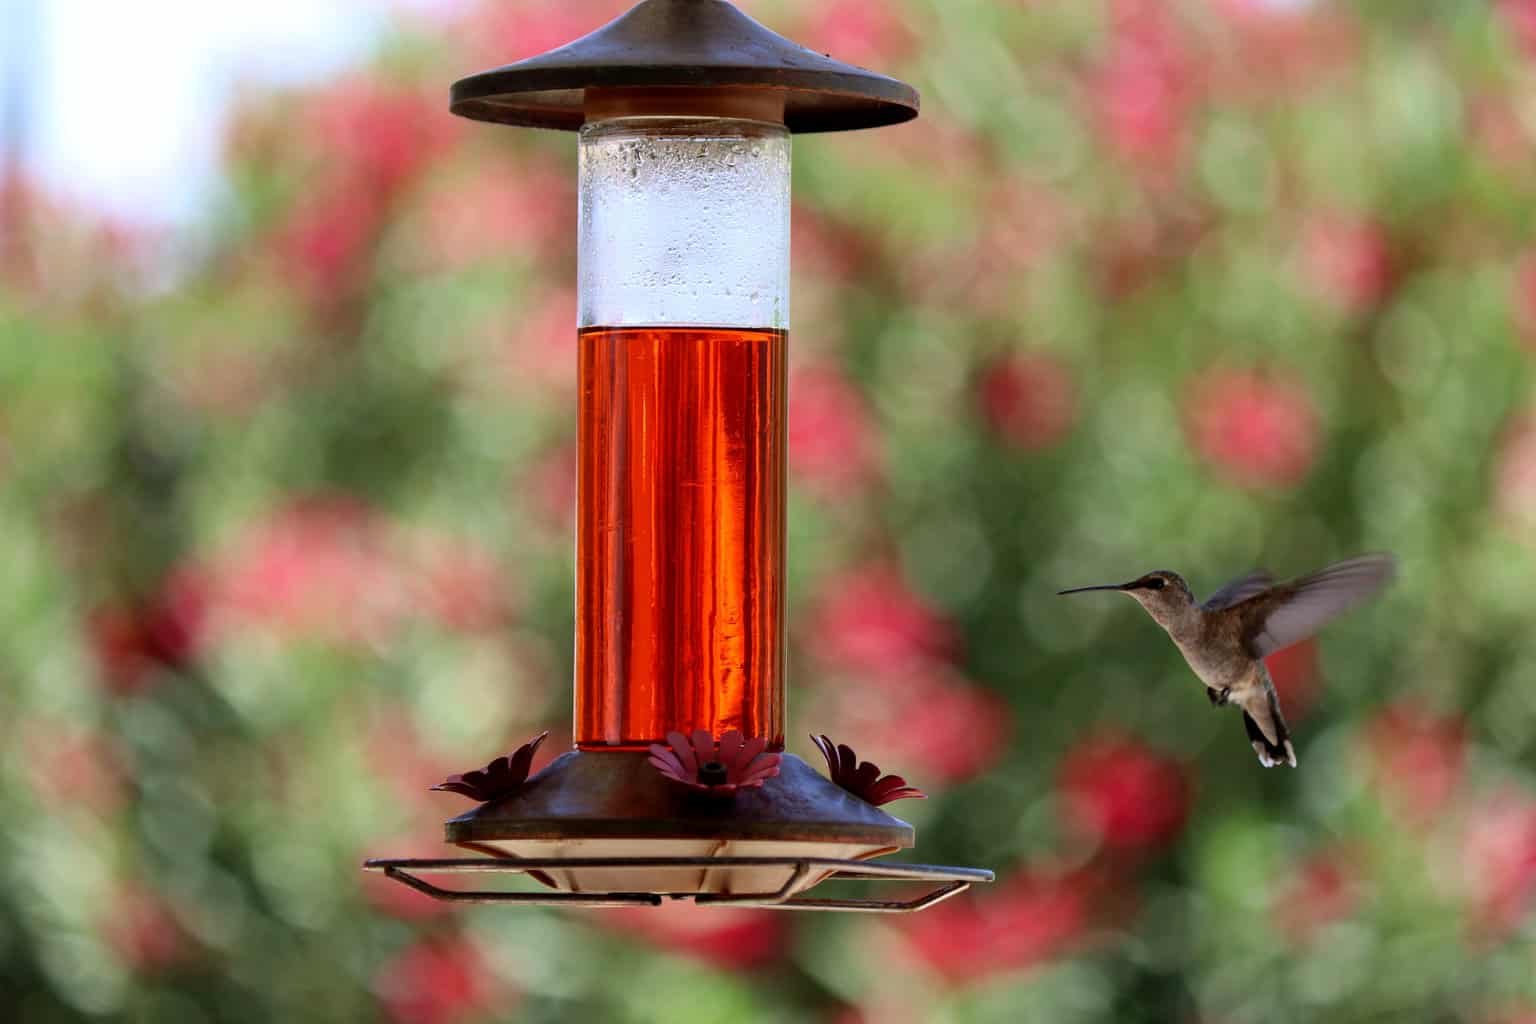 Where to place a hummingbird feeder in your backyard – 5 essential tips